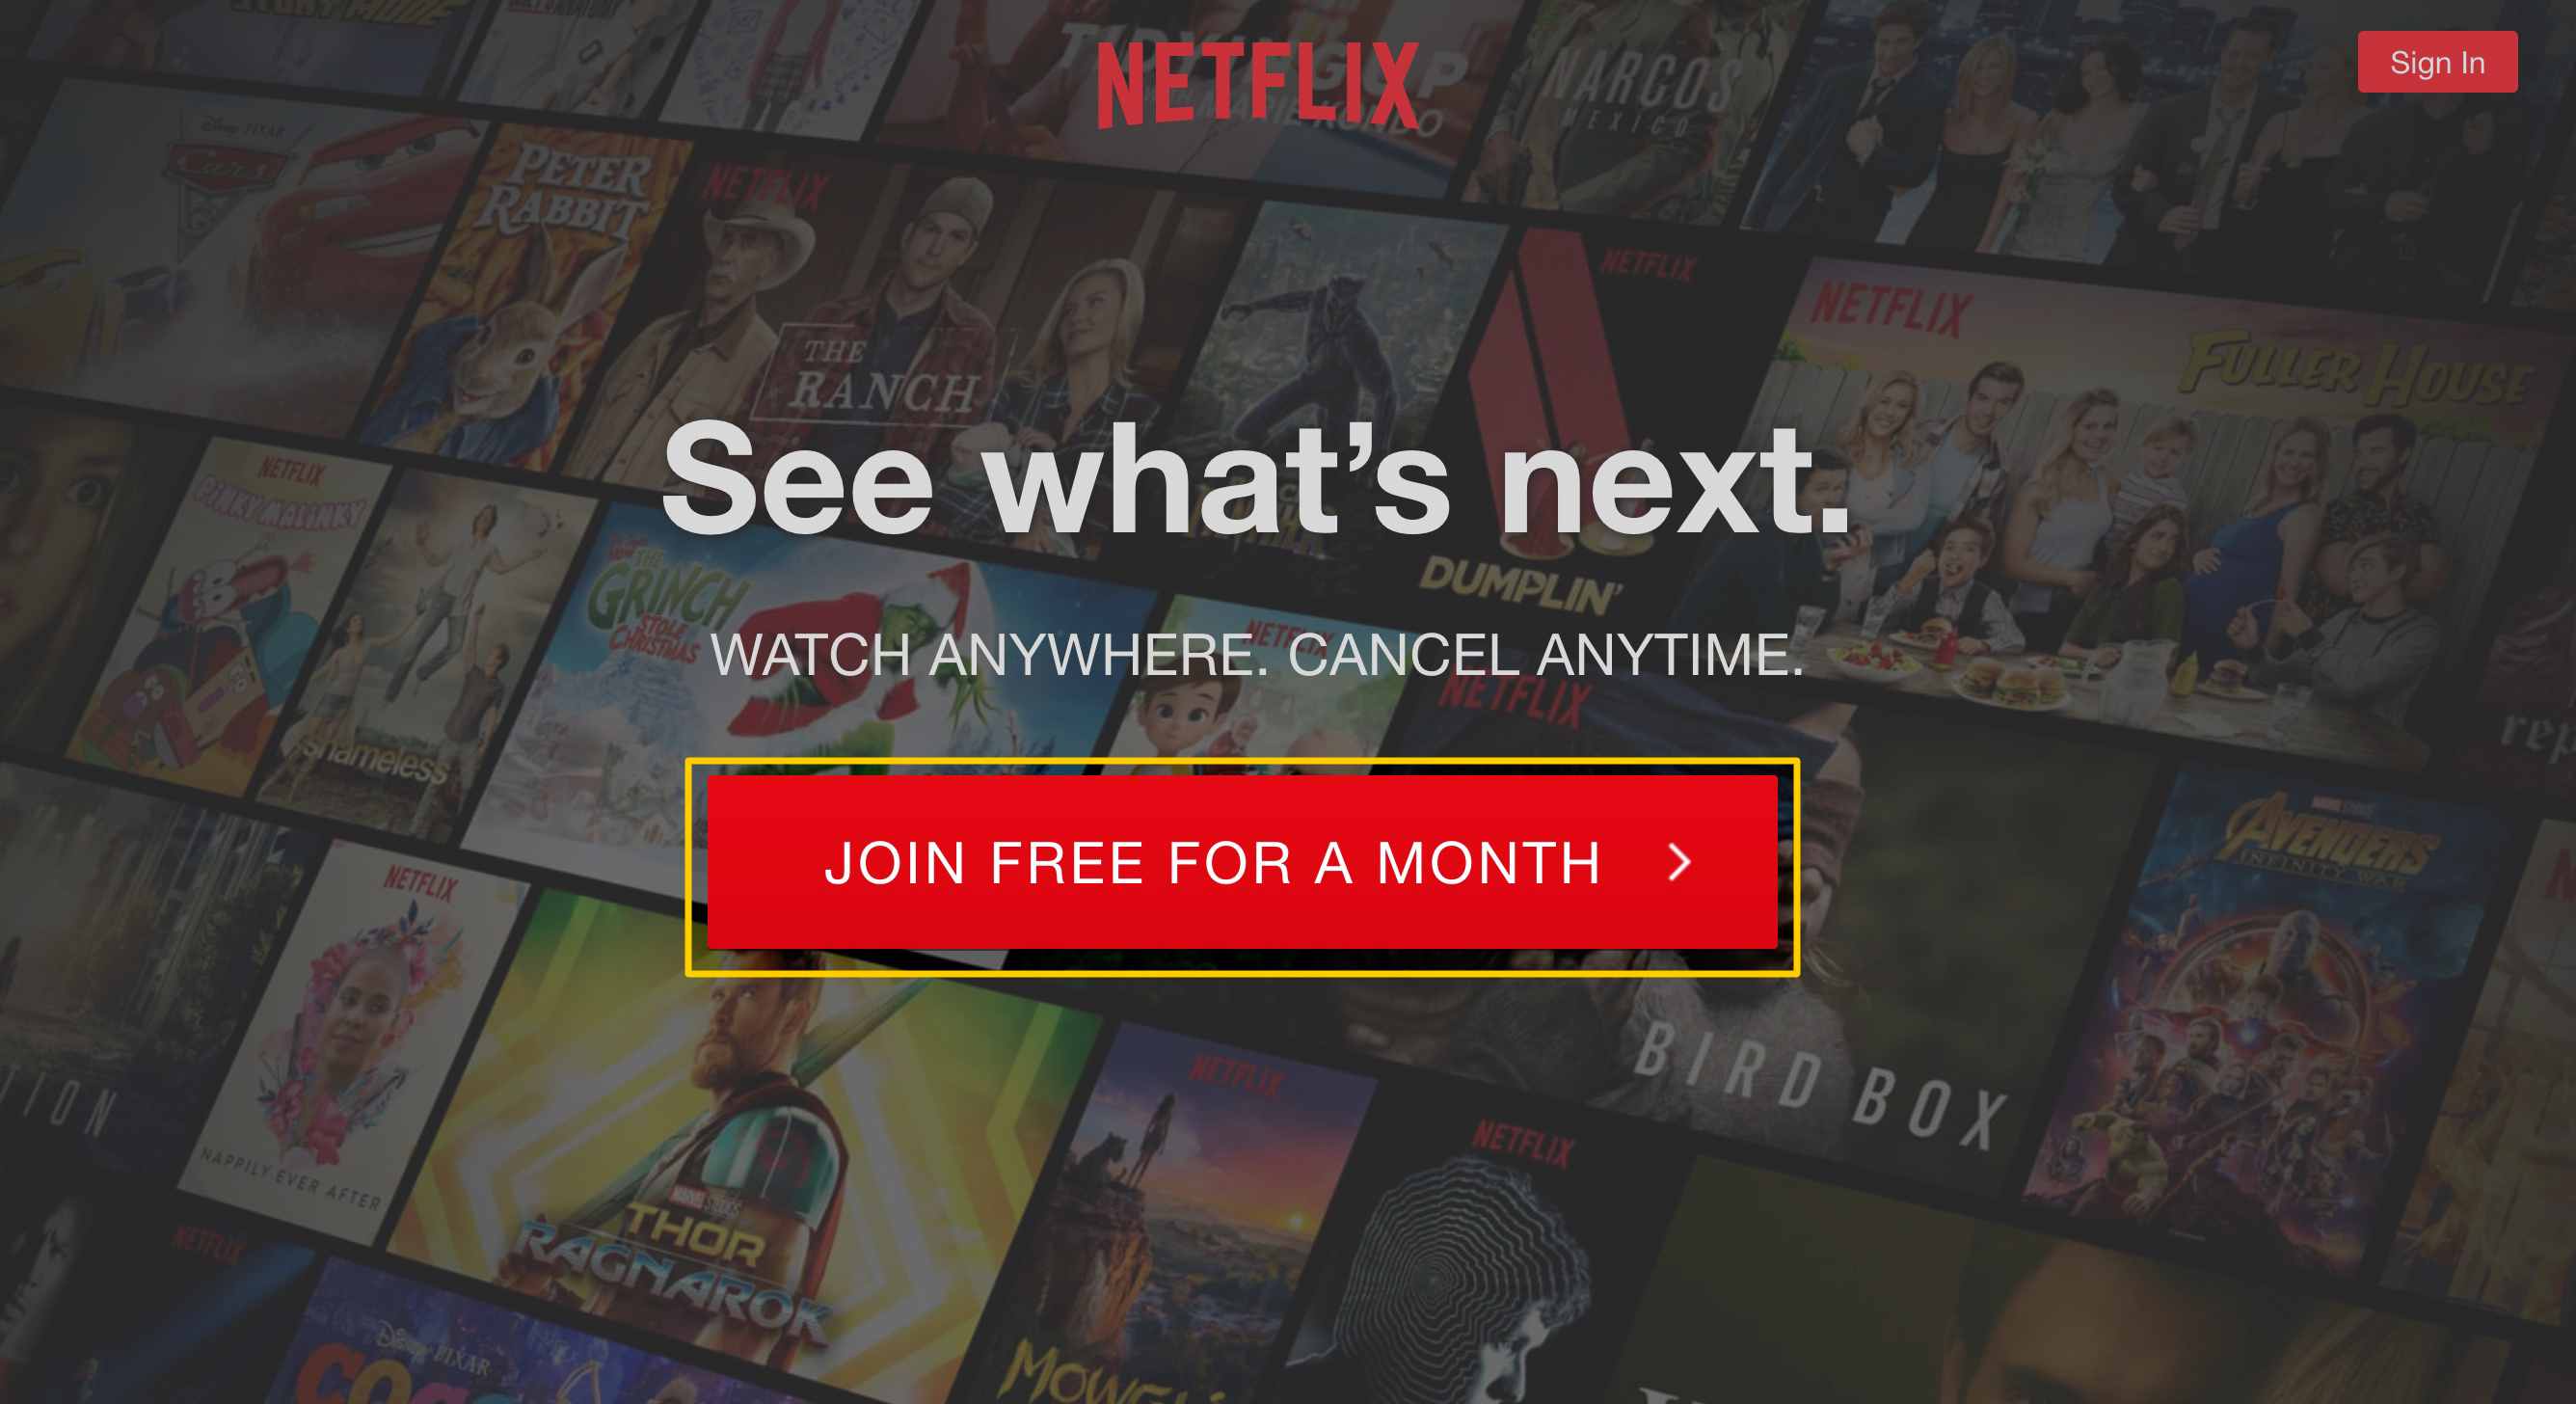 How to get netflix free trial no credit card check